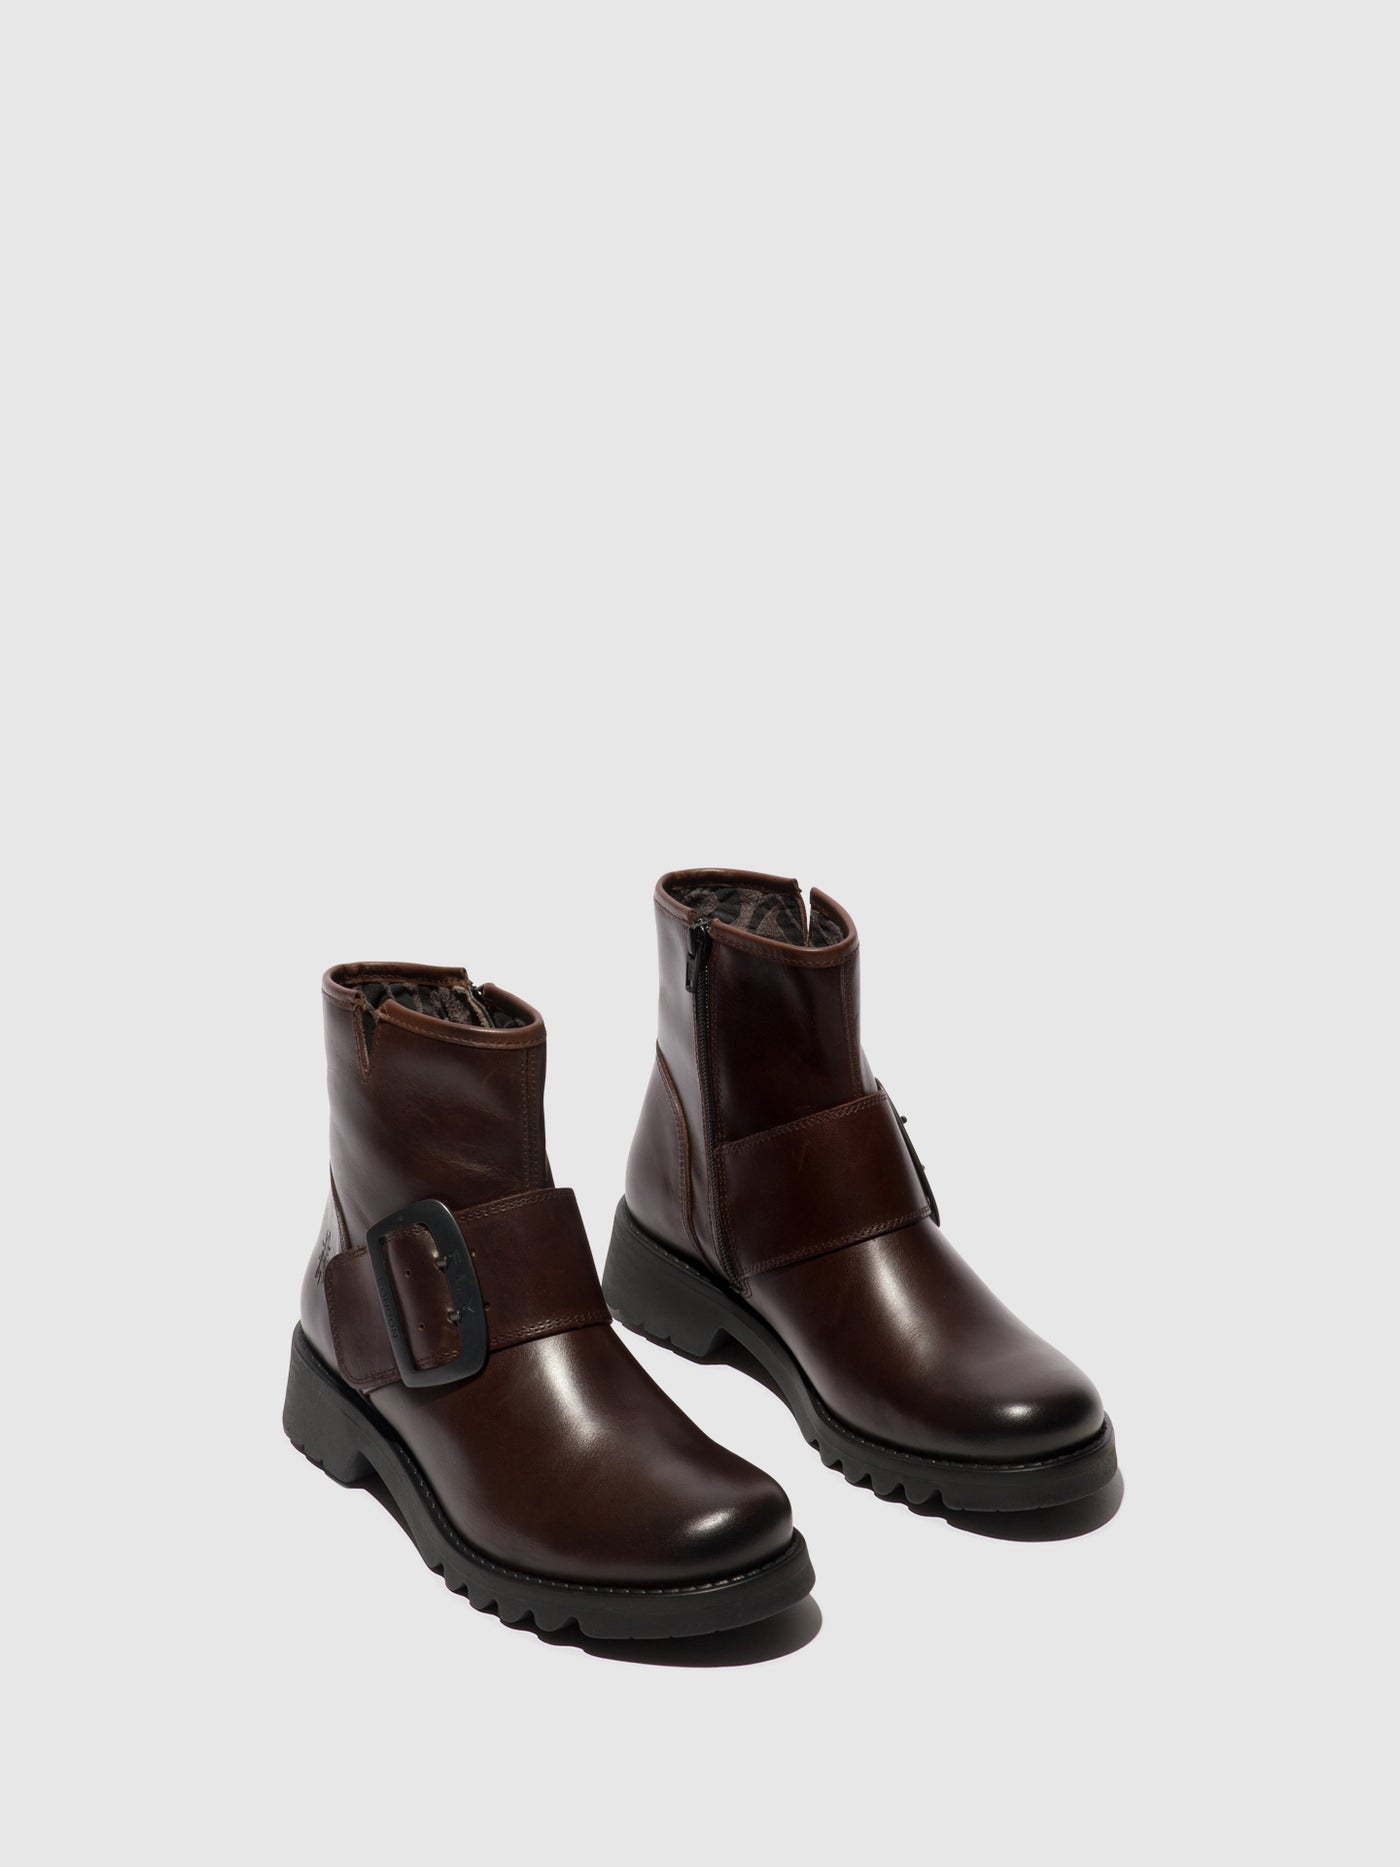 Buckle Ankle Boots RILY991FLY DARK BROWN